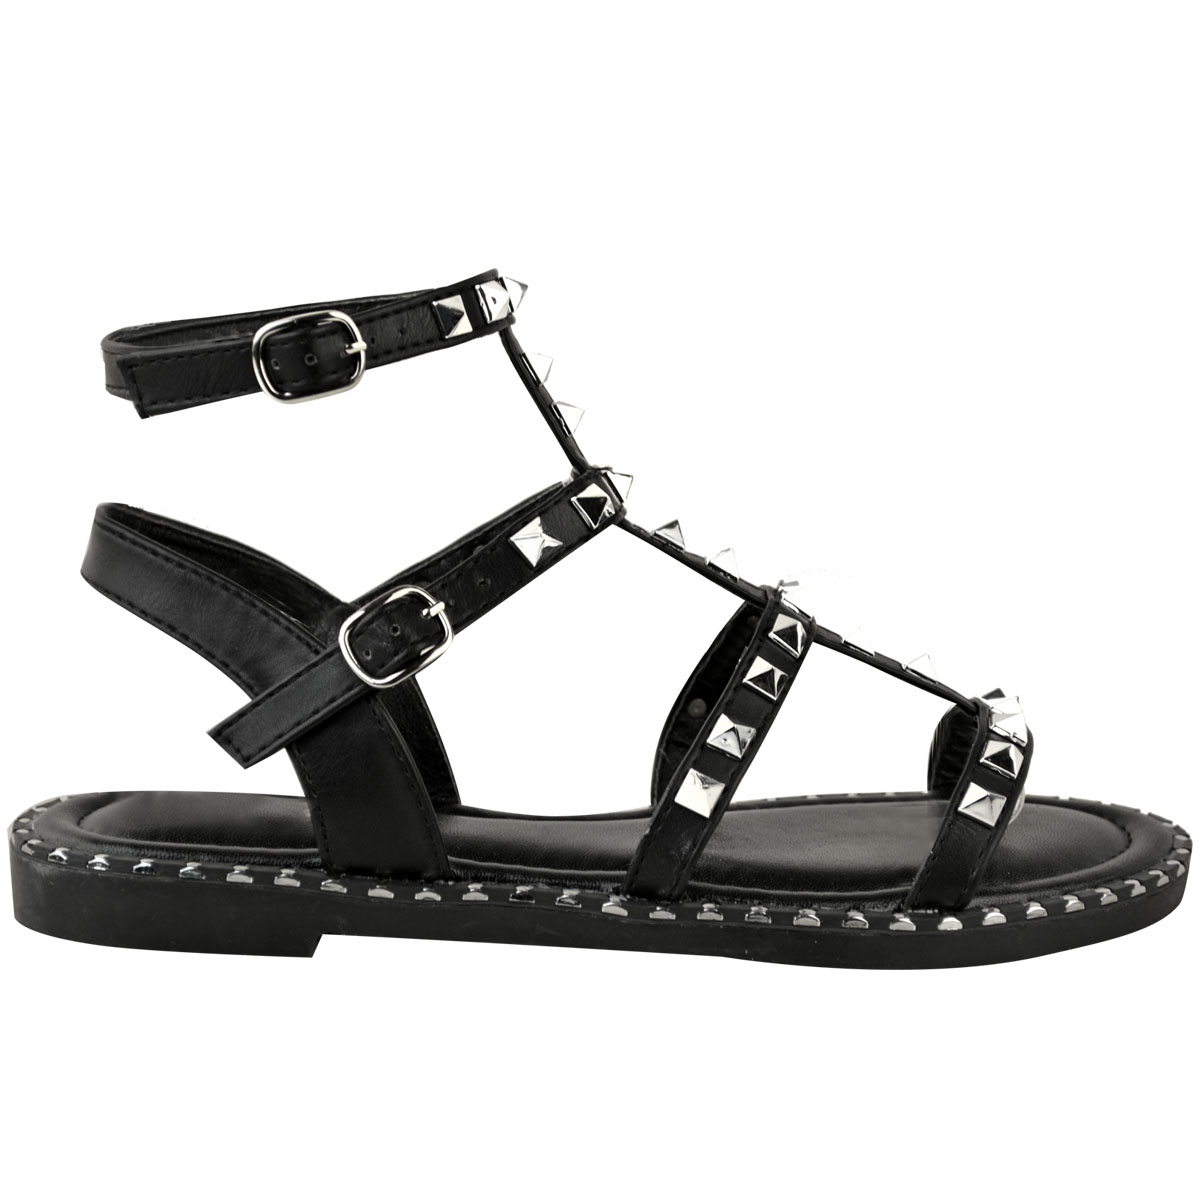 New Womens Studded Flat Gladiator Sandals Strappy Biker Goth Punk Shoes ...